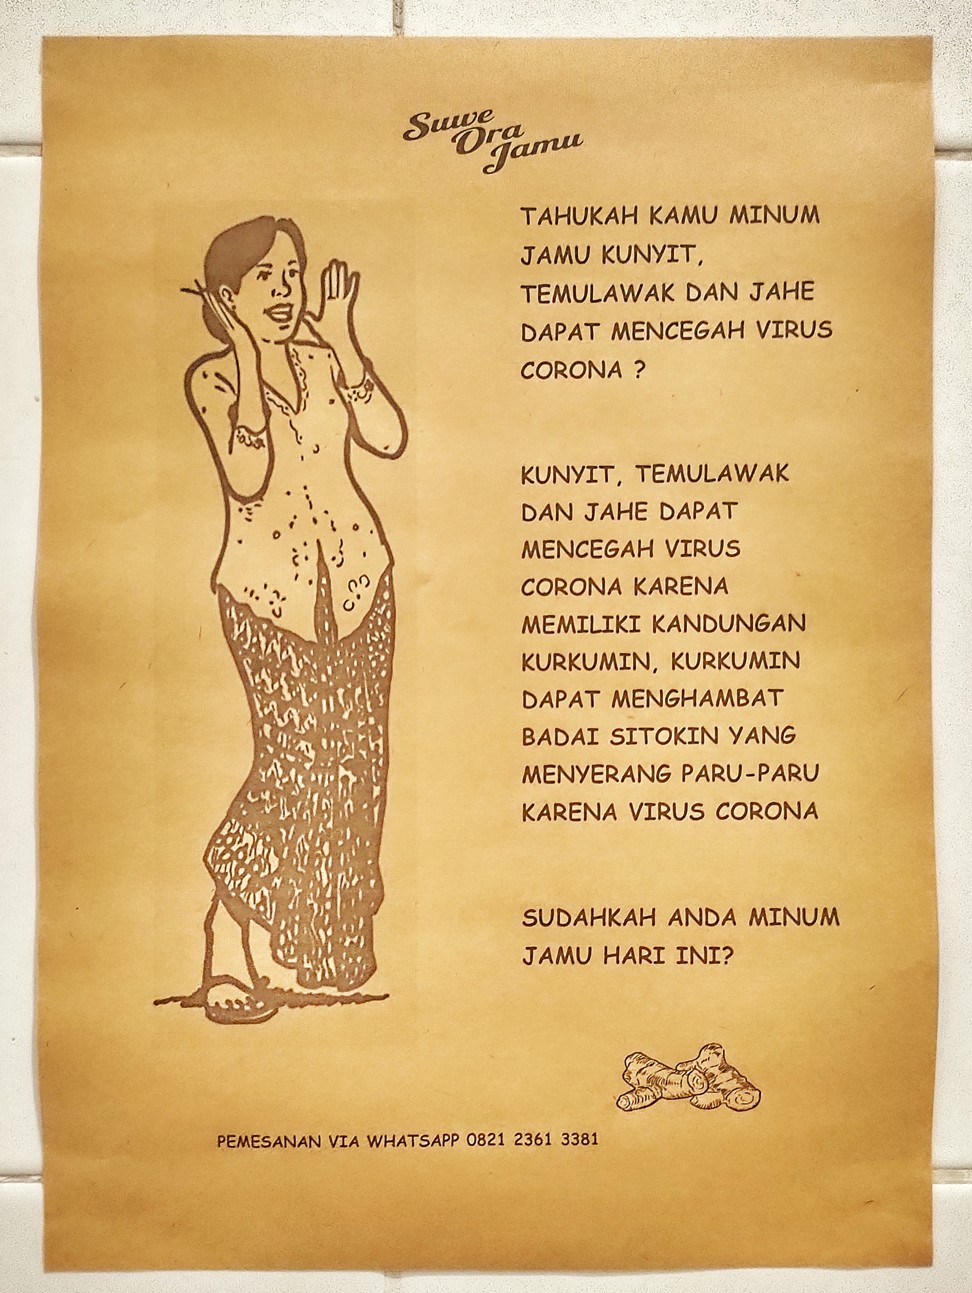 A flier at Suwe Ora Jamu flier saying: “Do you know that drinking jamu that contains ginger, curcuma and turmeric can prevent the coronavirus from infecting us?” Photo: Sylviana Hamdani